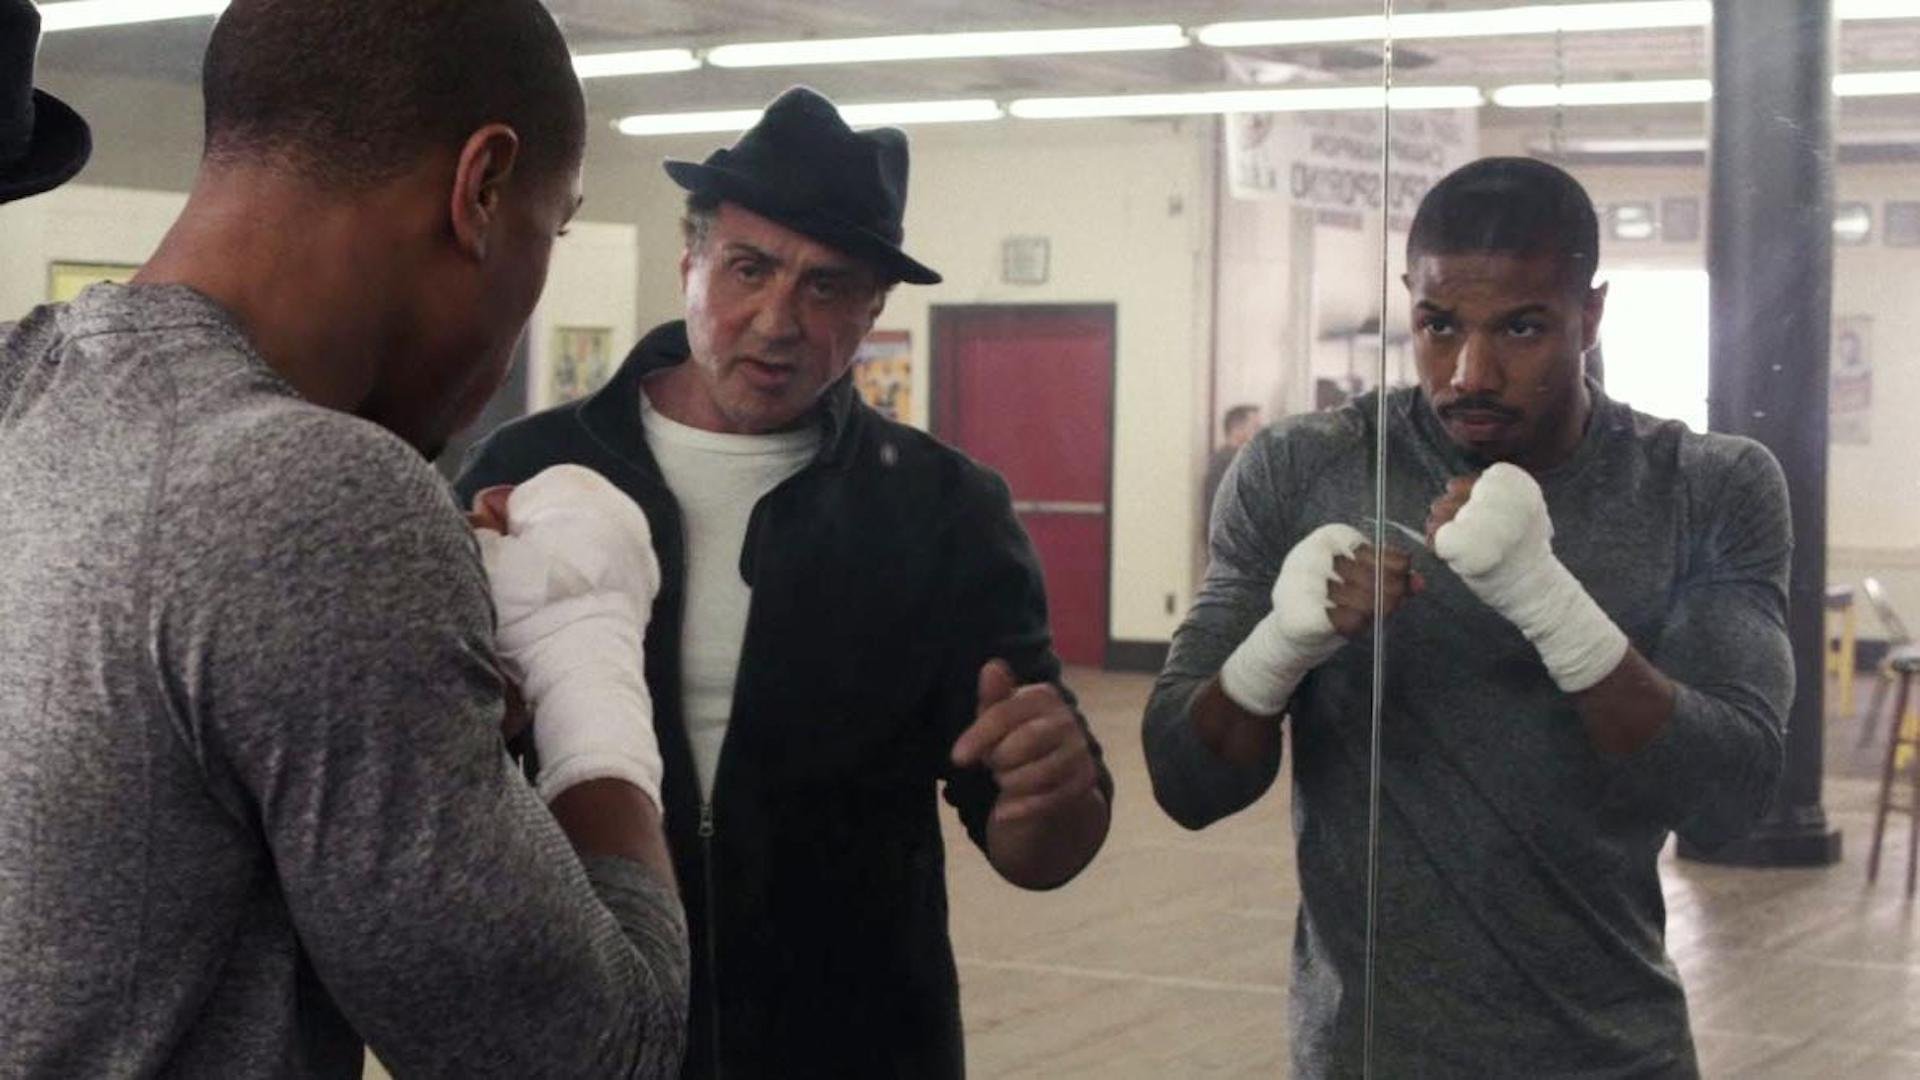 Donnie Creed (Michael B. Jordan) looking into a practice mirror while Rocky (Sylvester Stallone) coaches him in 'Creed' (2015)